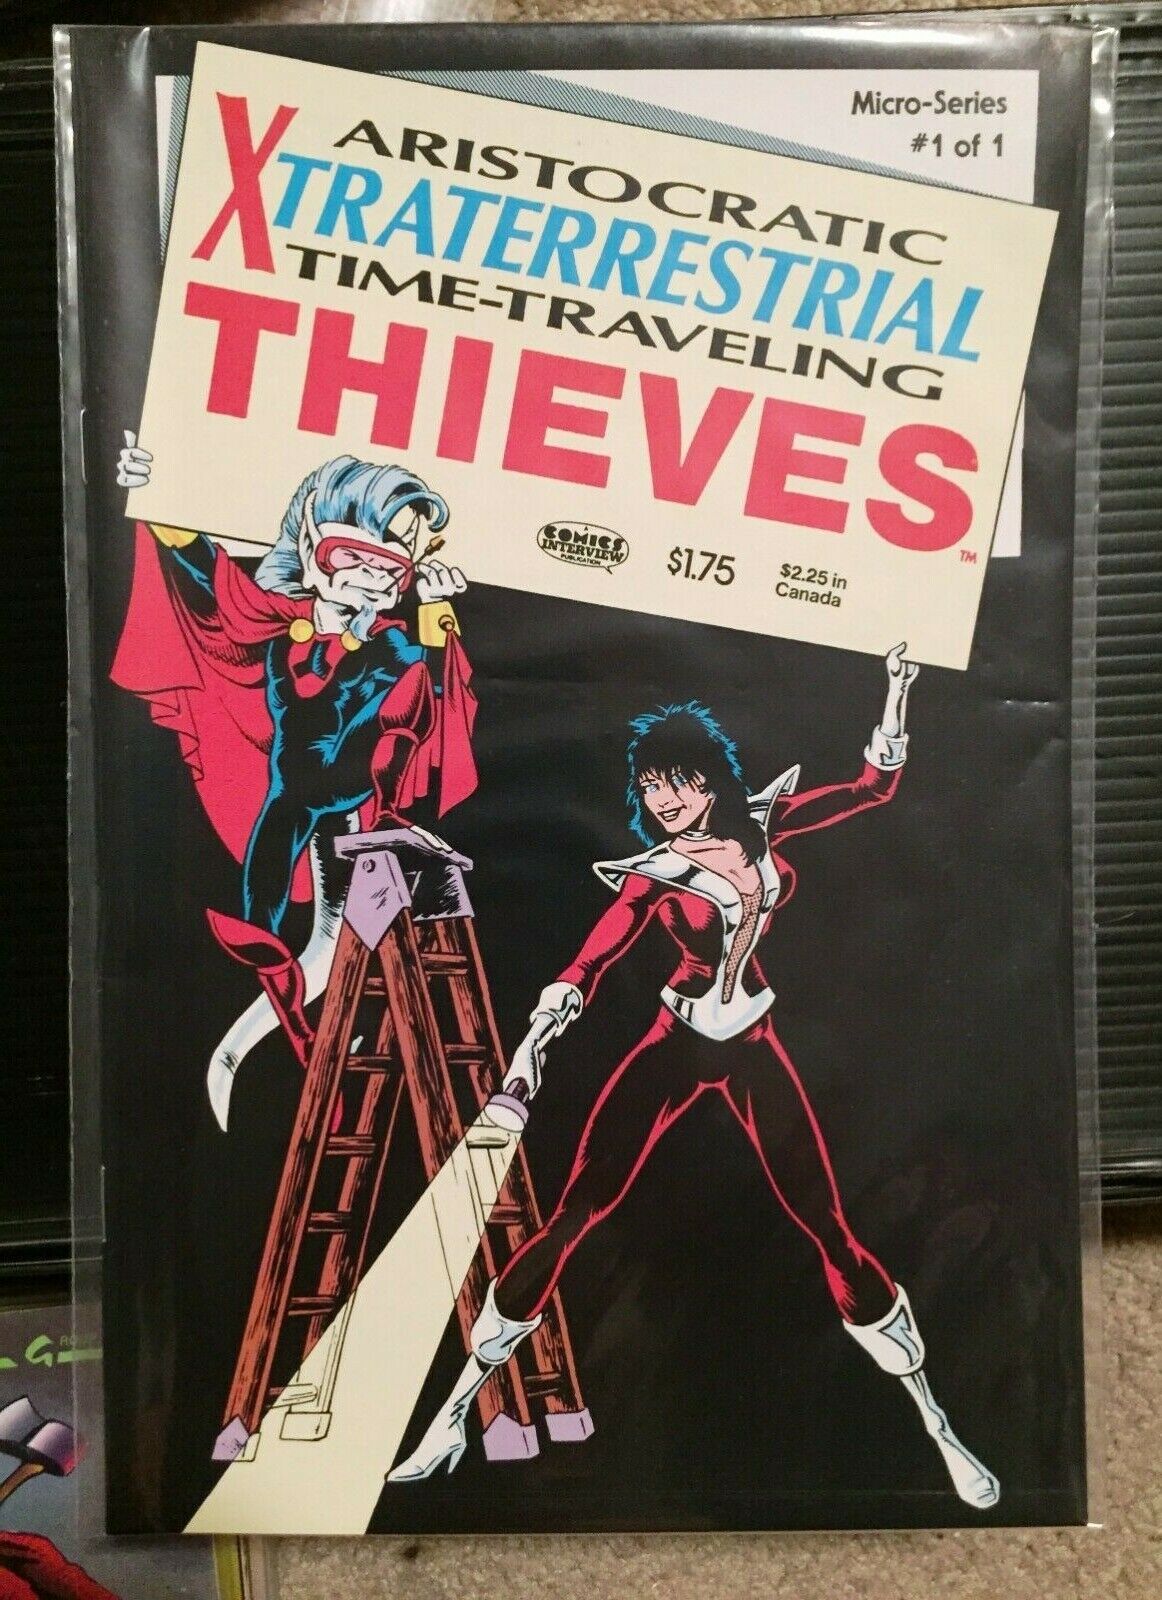 ARISTOCRATIC XTRATERRESTRIAL TIME-TRAVELING THIEVES #1 (1st appearance) 1986